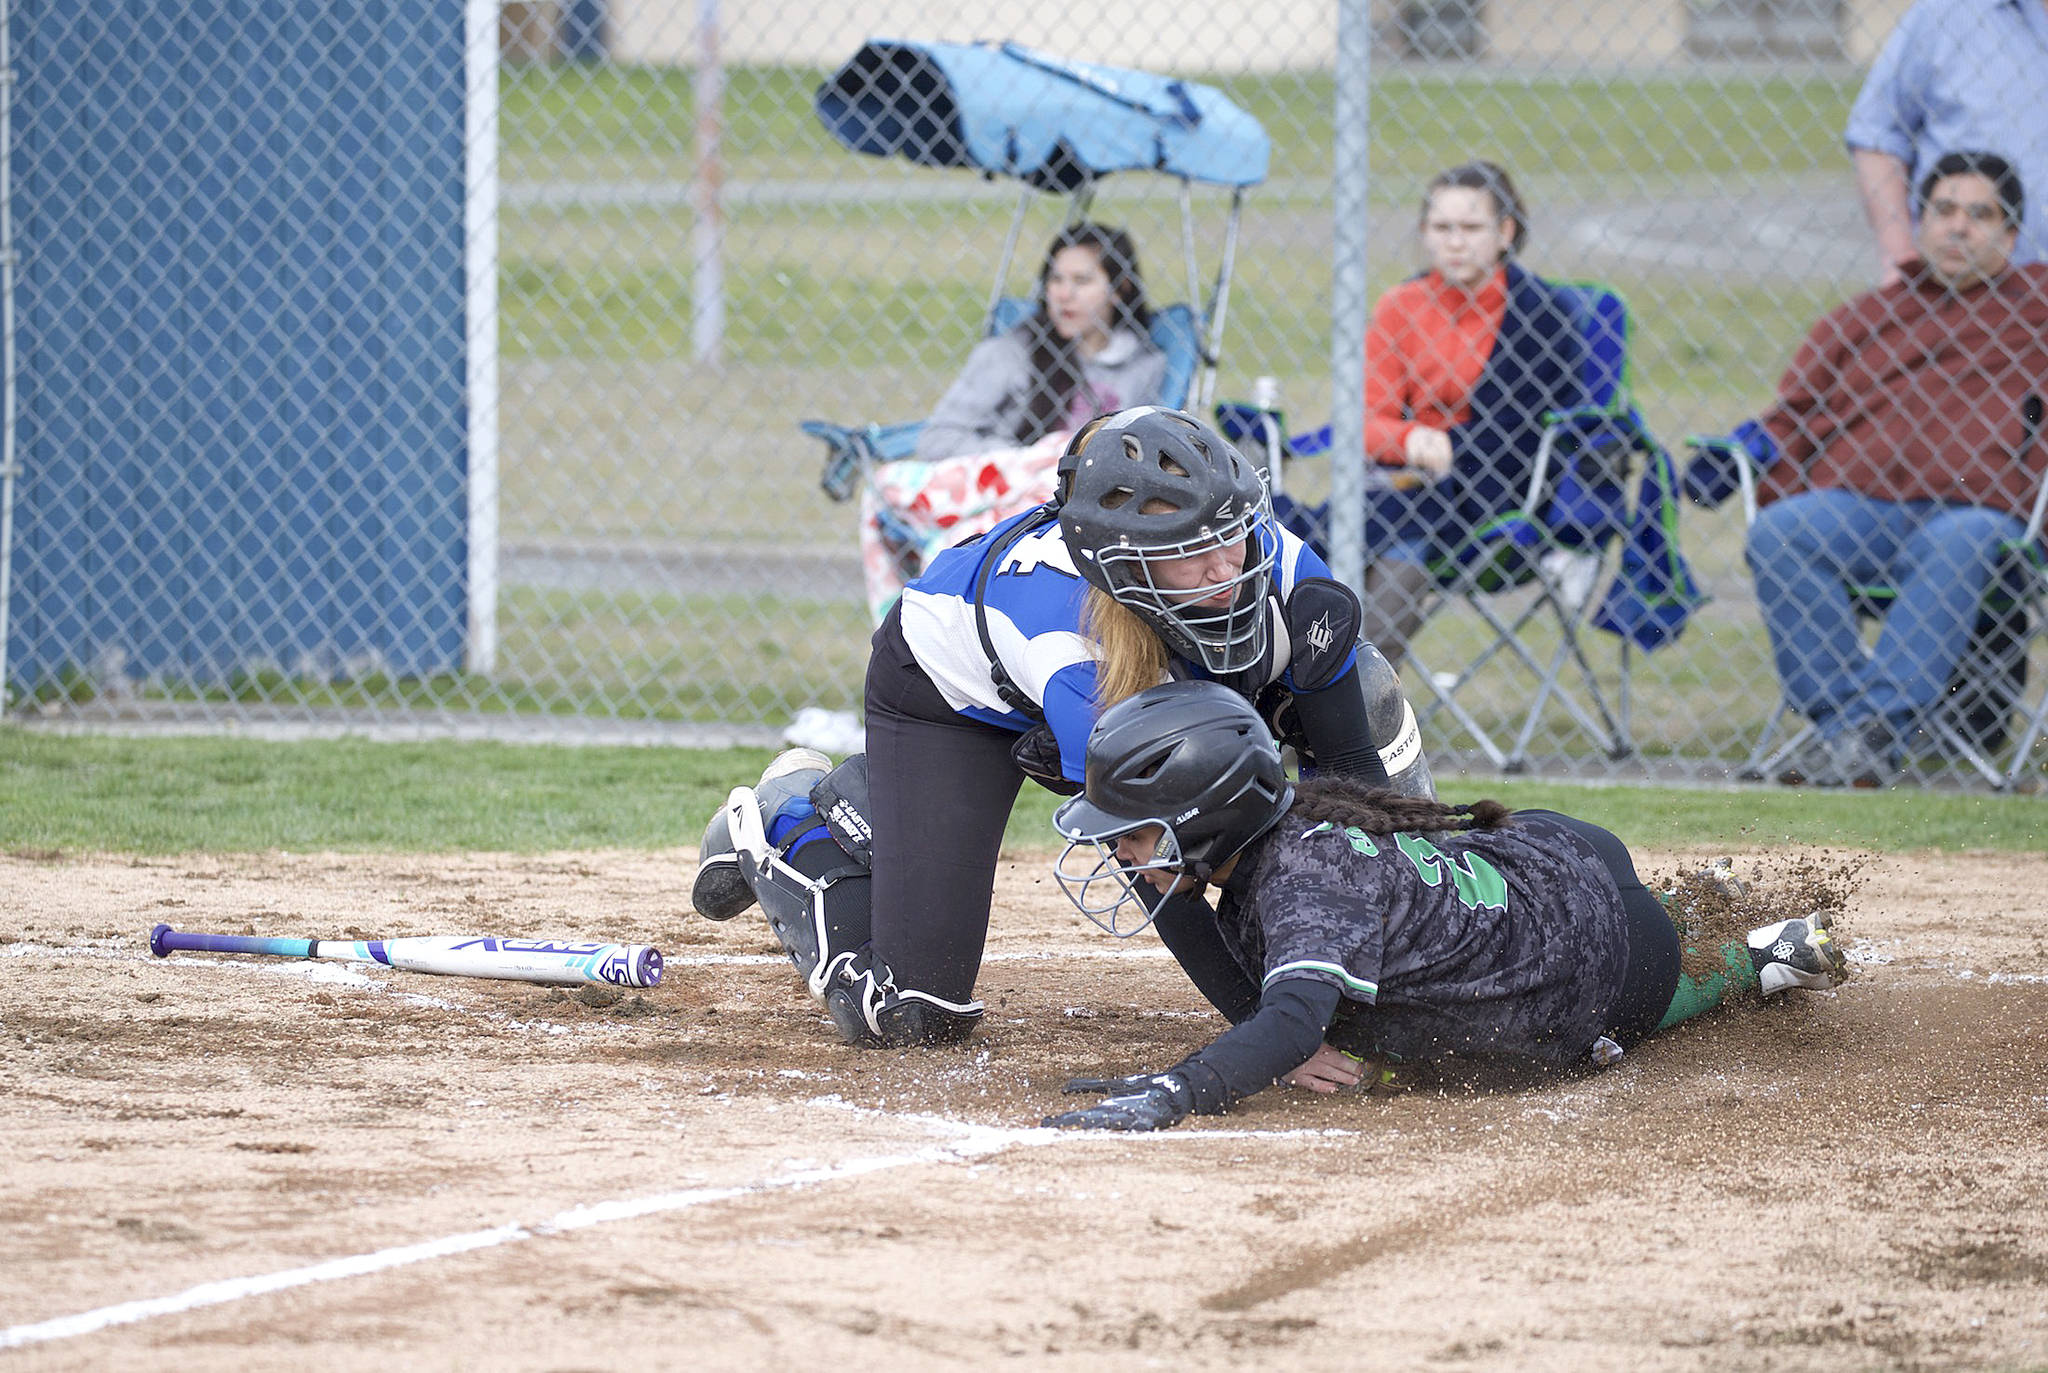 Steve Mullensky/for Peninsula Daily News                                Chimacum’s Mechelle Nisbet tags out Klahowya’s Hannah Bastian at home plate during the Cowboys’ 5-4 win Friday.